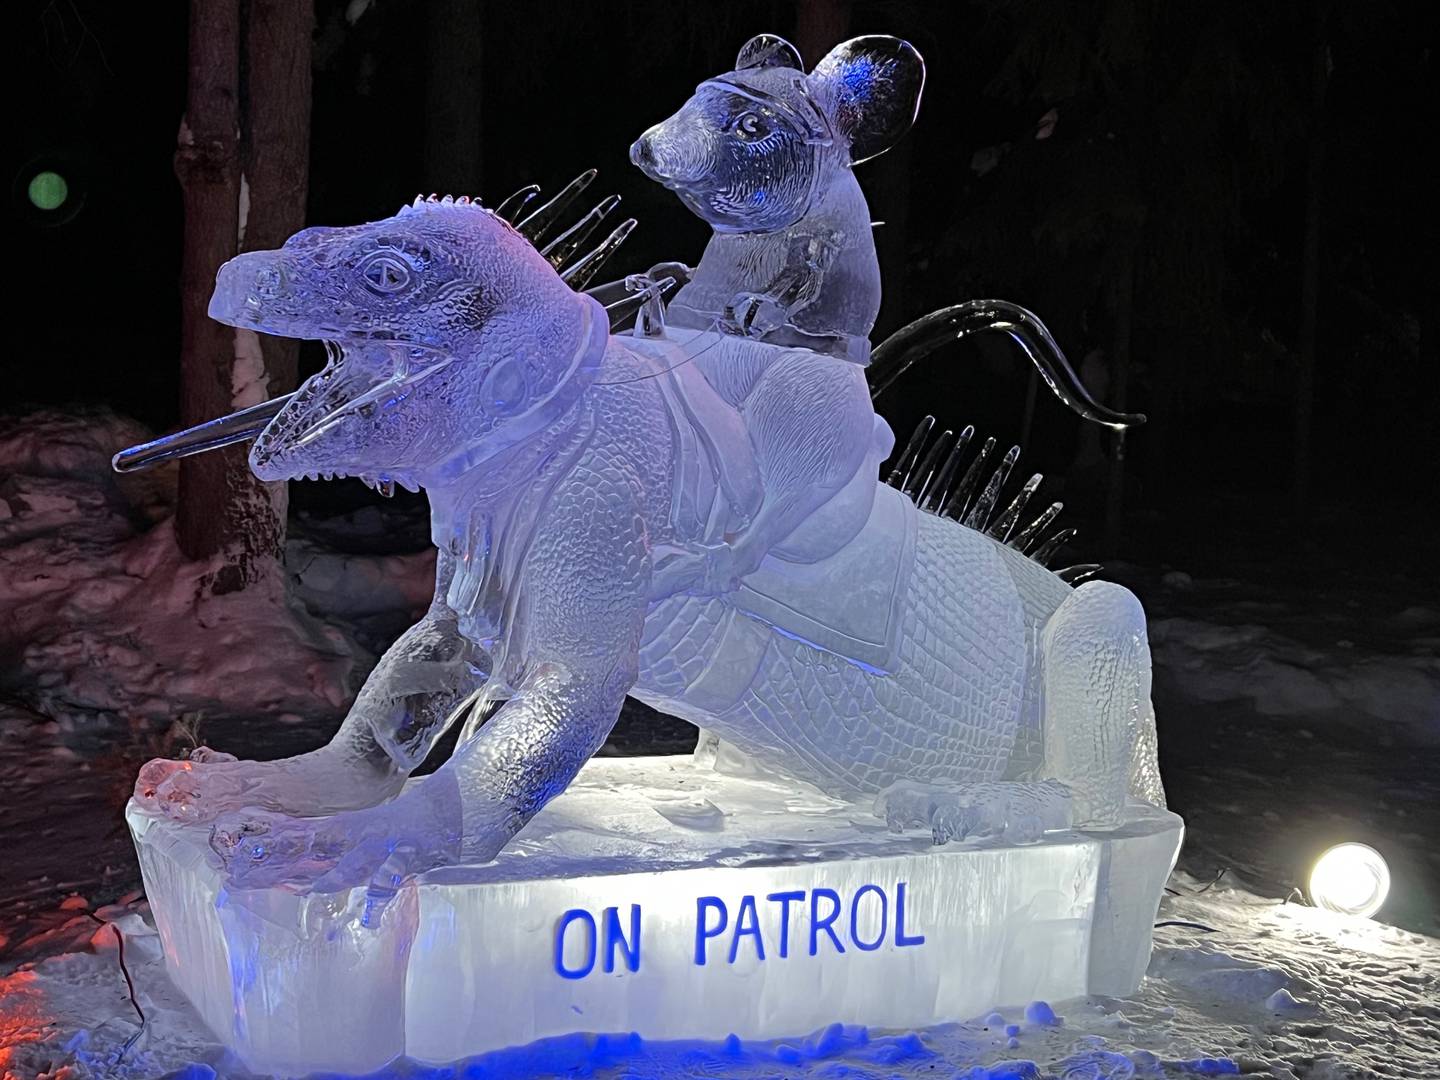 A fantastical ice carving by Steve and Heather Brice, on display at the Ice Alaska park in Fairbanks